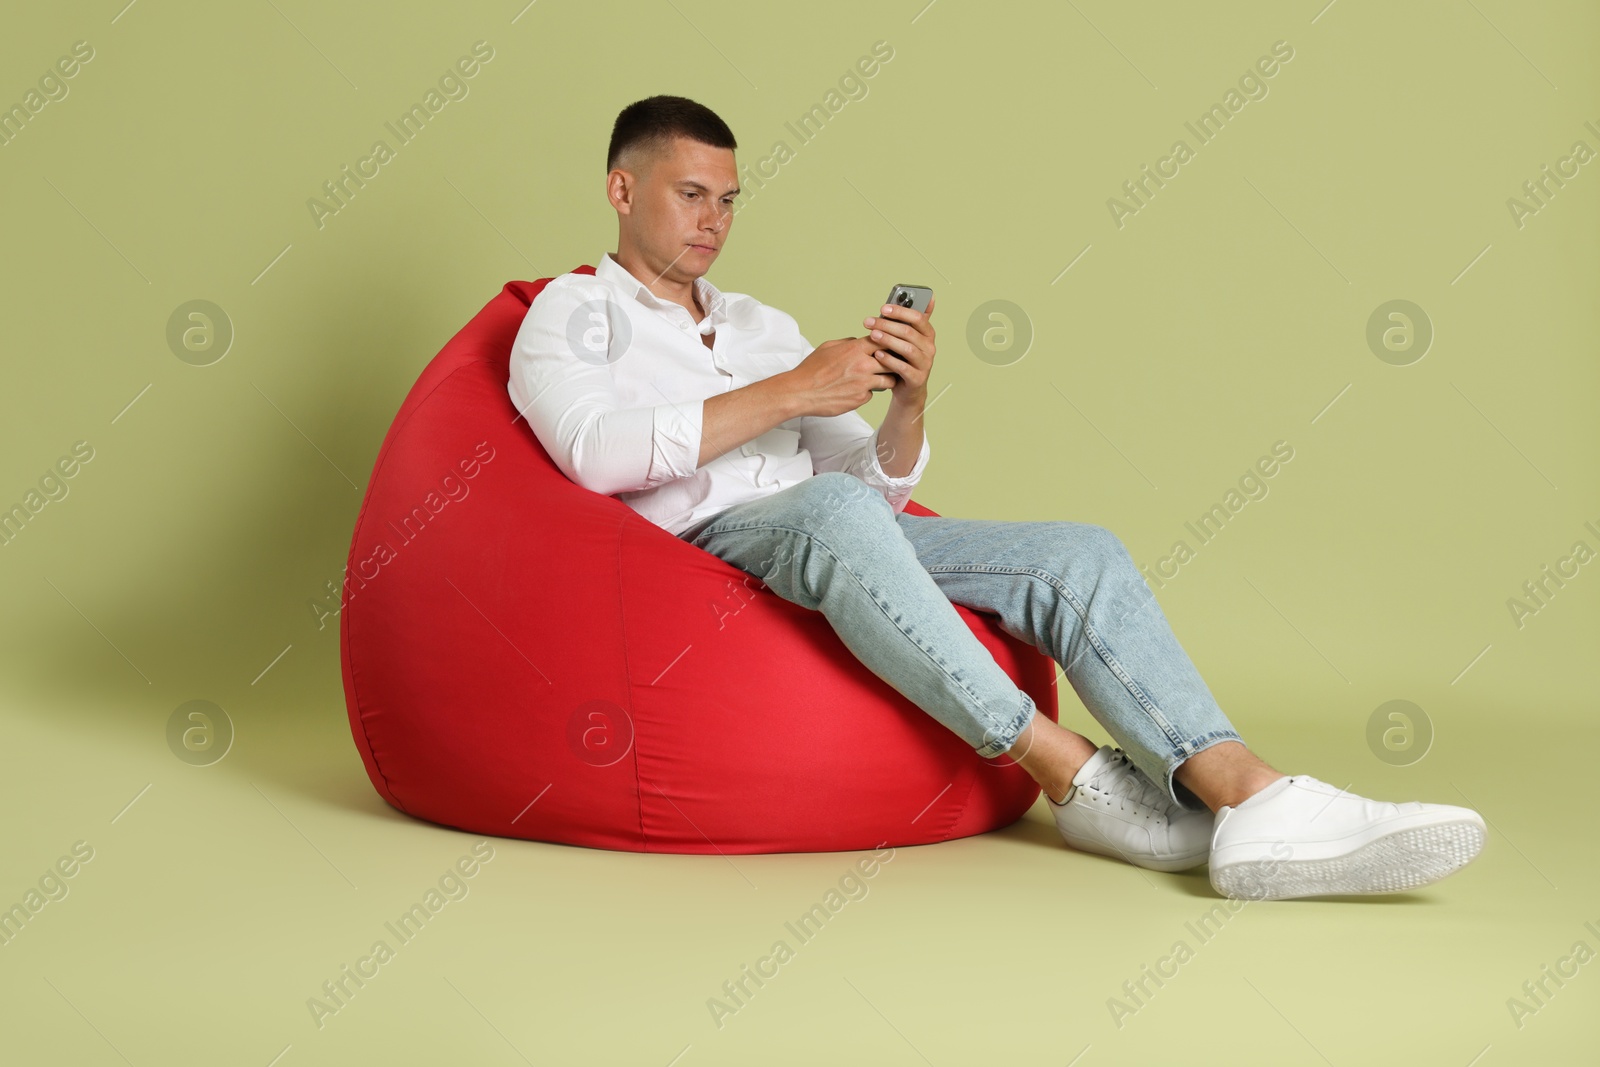 Photo of Handsome man with smartphone on red bean bag chair against green background